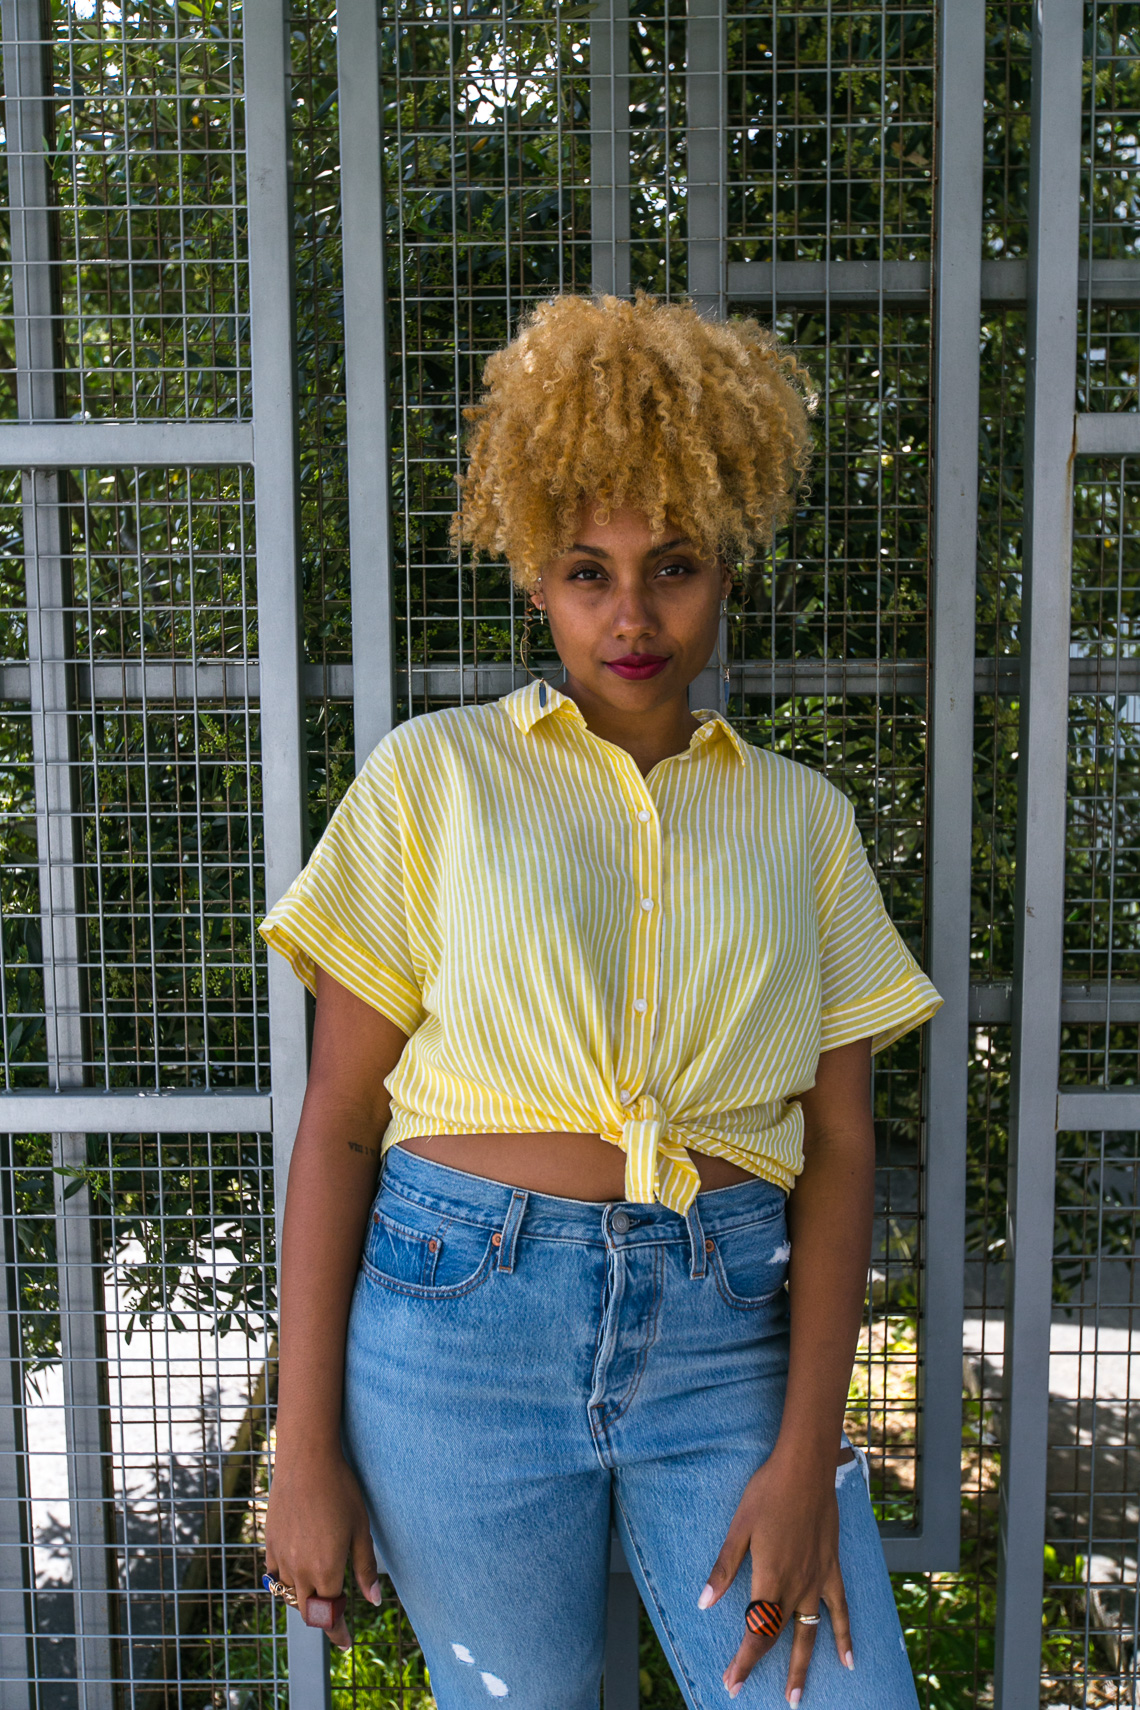 h&m-wear who you are-levis wedgie fit jeans-rsee-yellow blouse-summer outfit-look 1